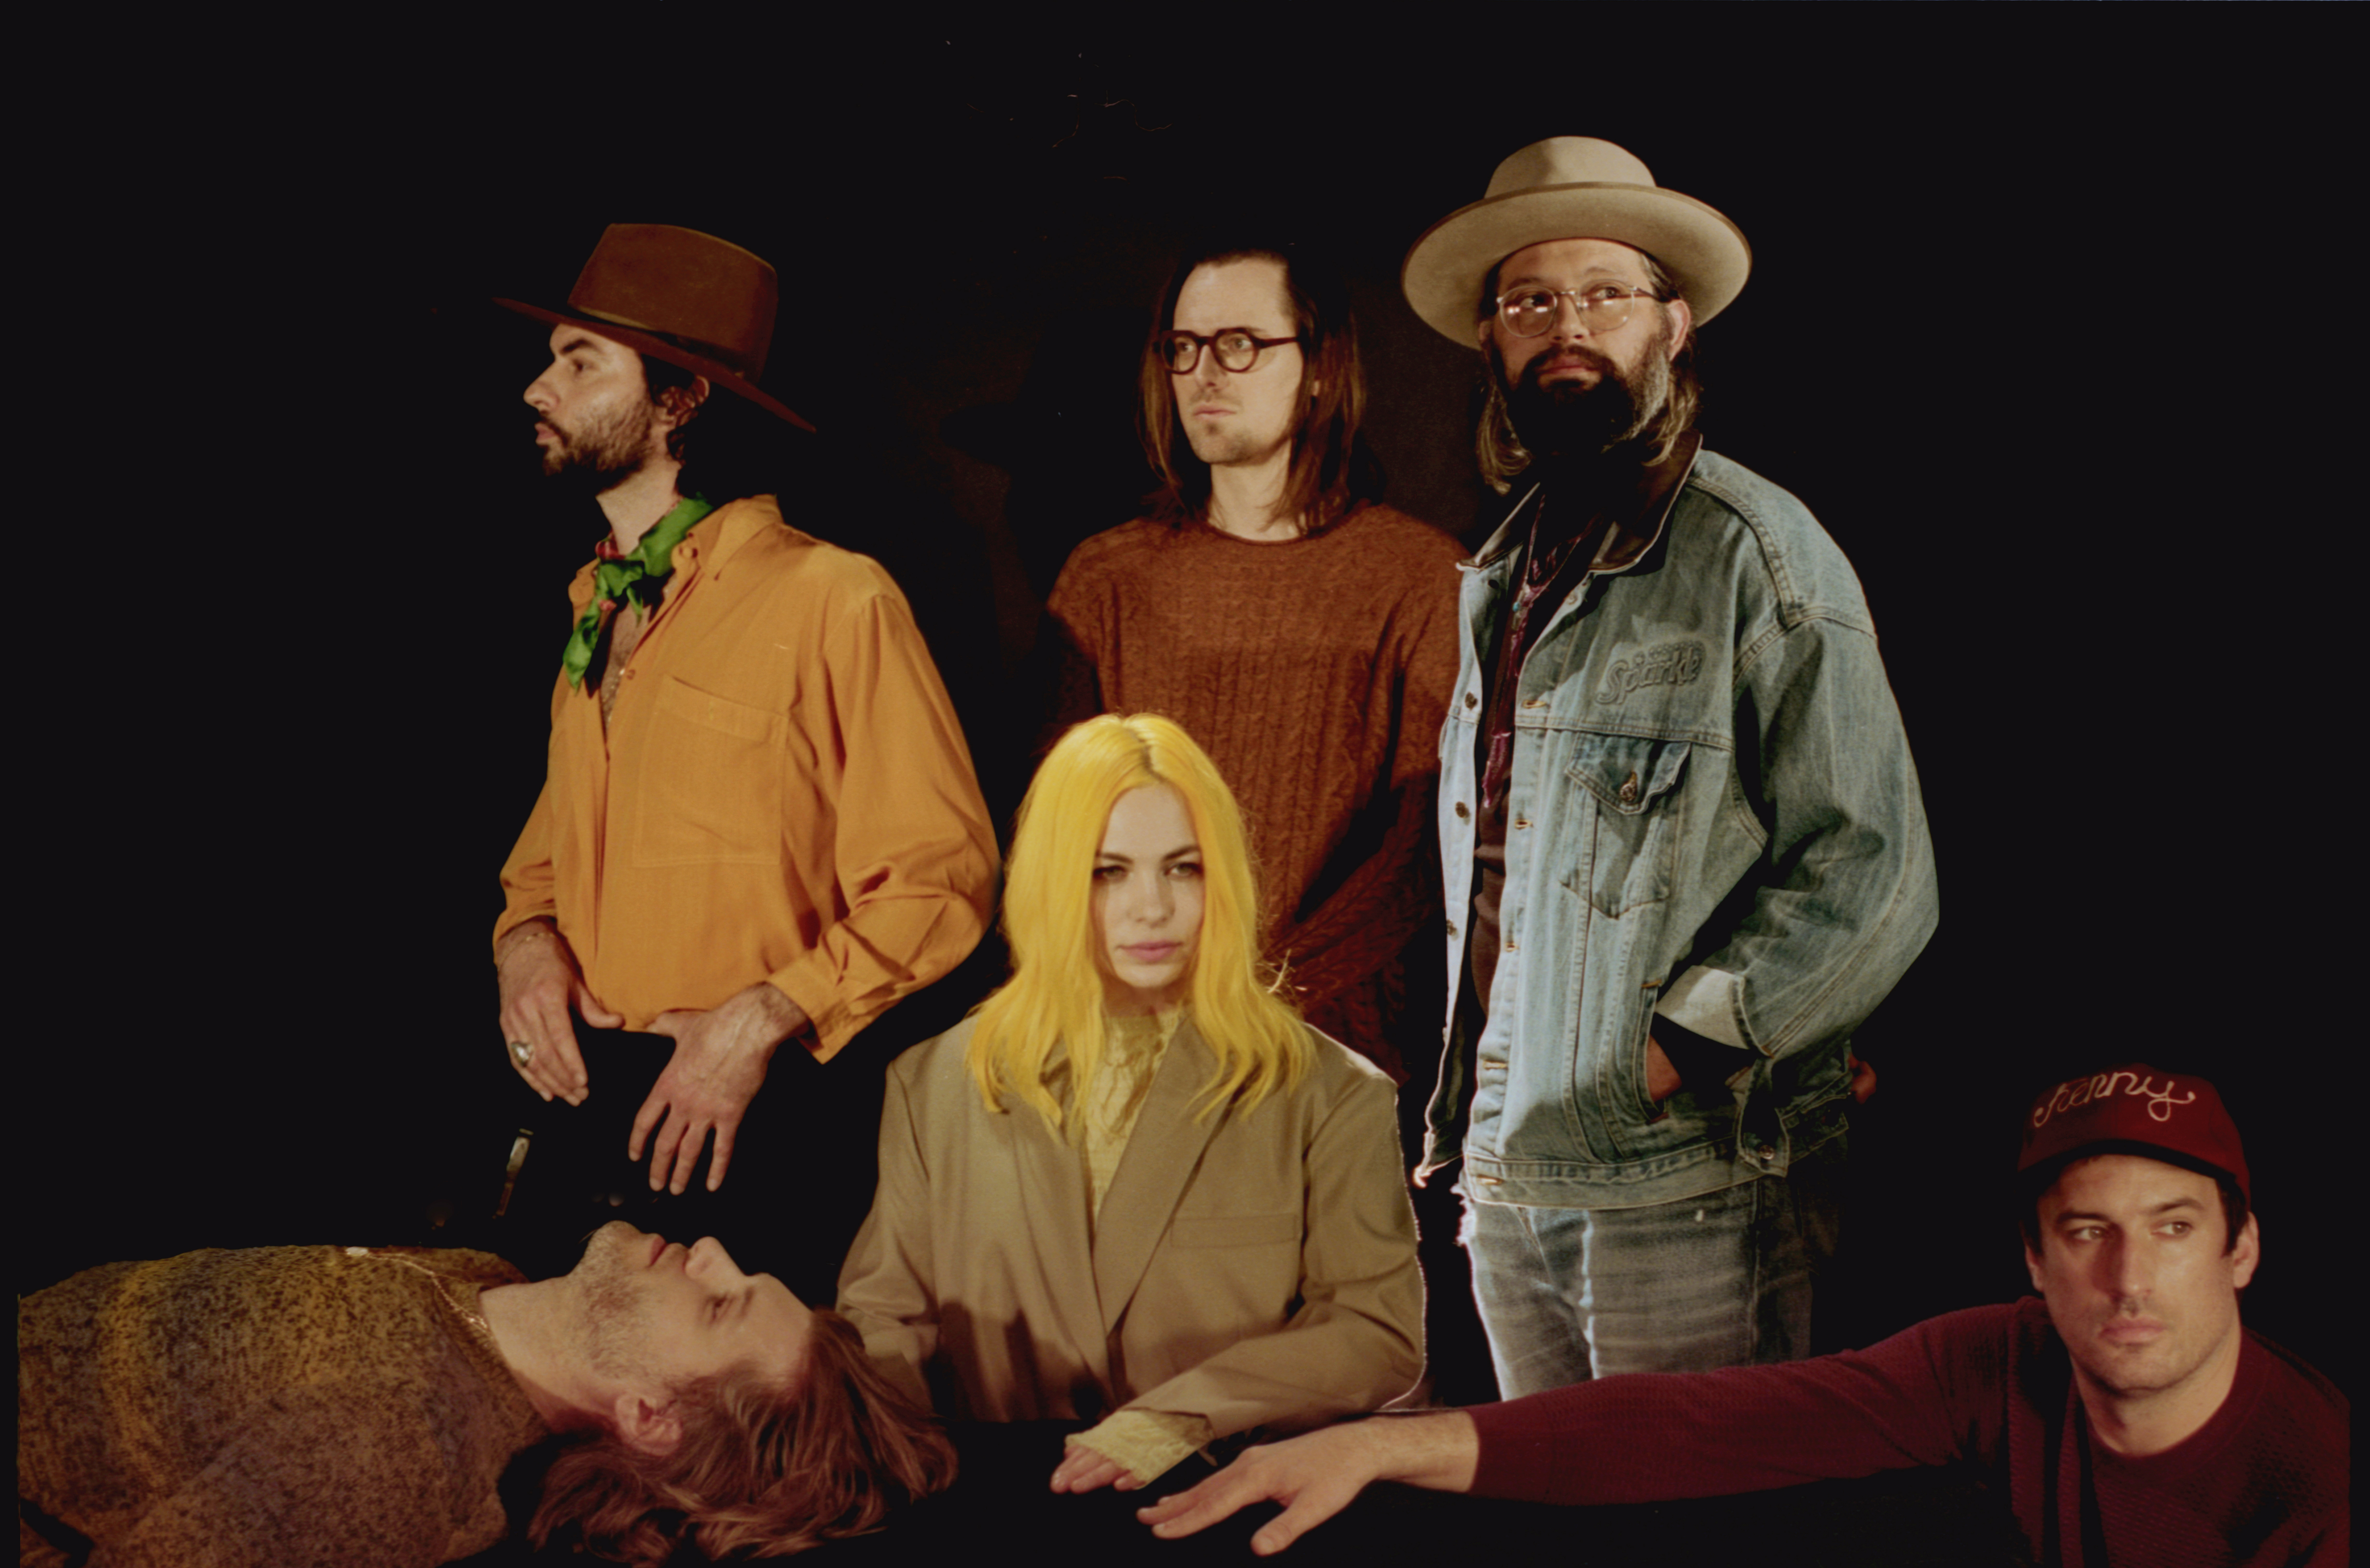 THE HEAD AND THE HEART CONTINUE LEAD-UP TO NEW ALBUM WITH LIFE